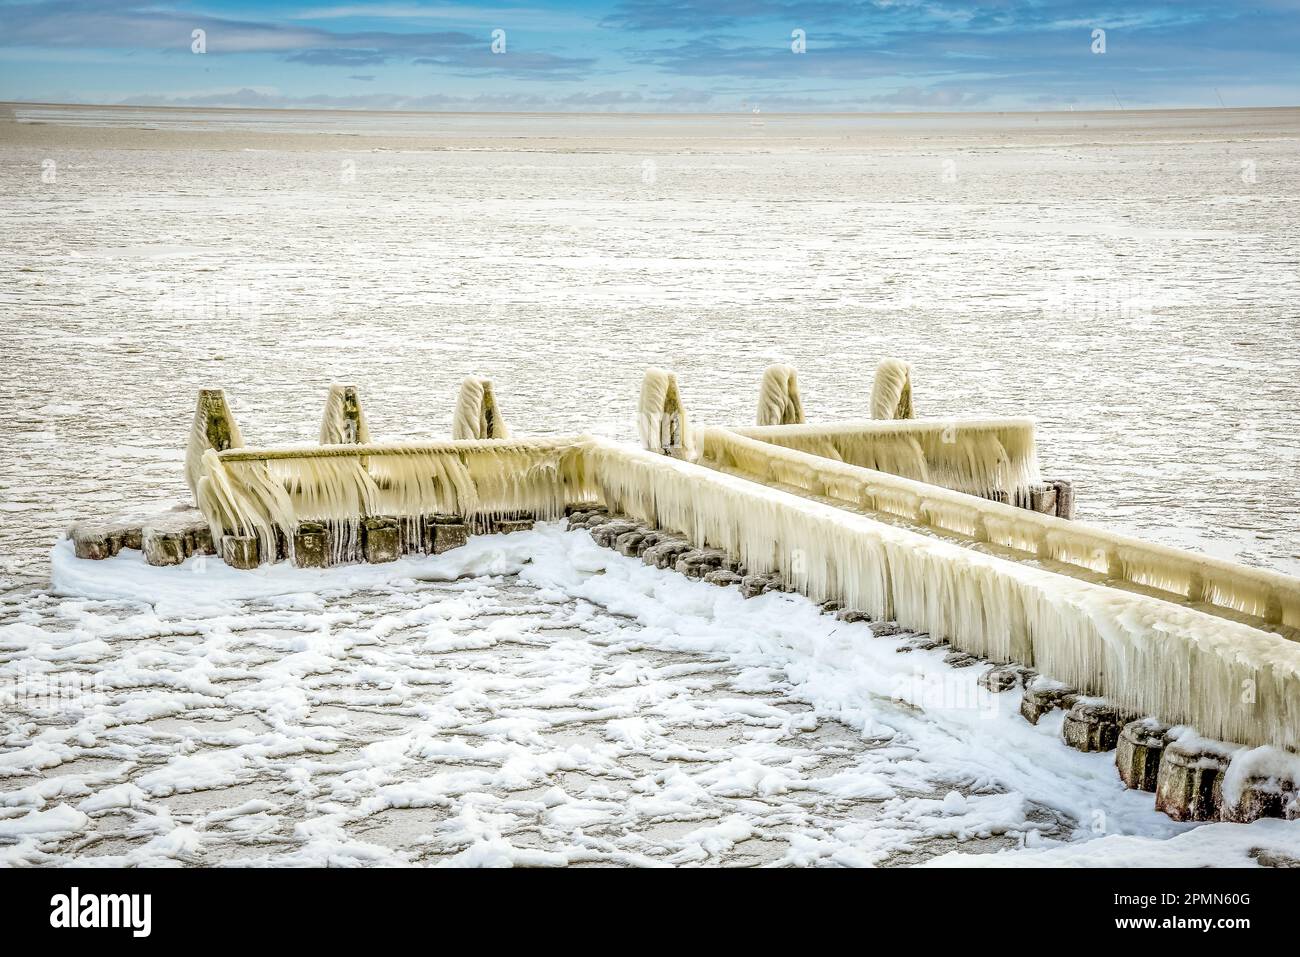 Den Oever, the Netherlands - February 10, 2021. Ice build-up on the piers of the Afsluitdijk in the IJsselmeer, Den Oever, Holland. Stock Photo